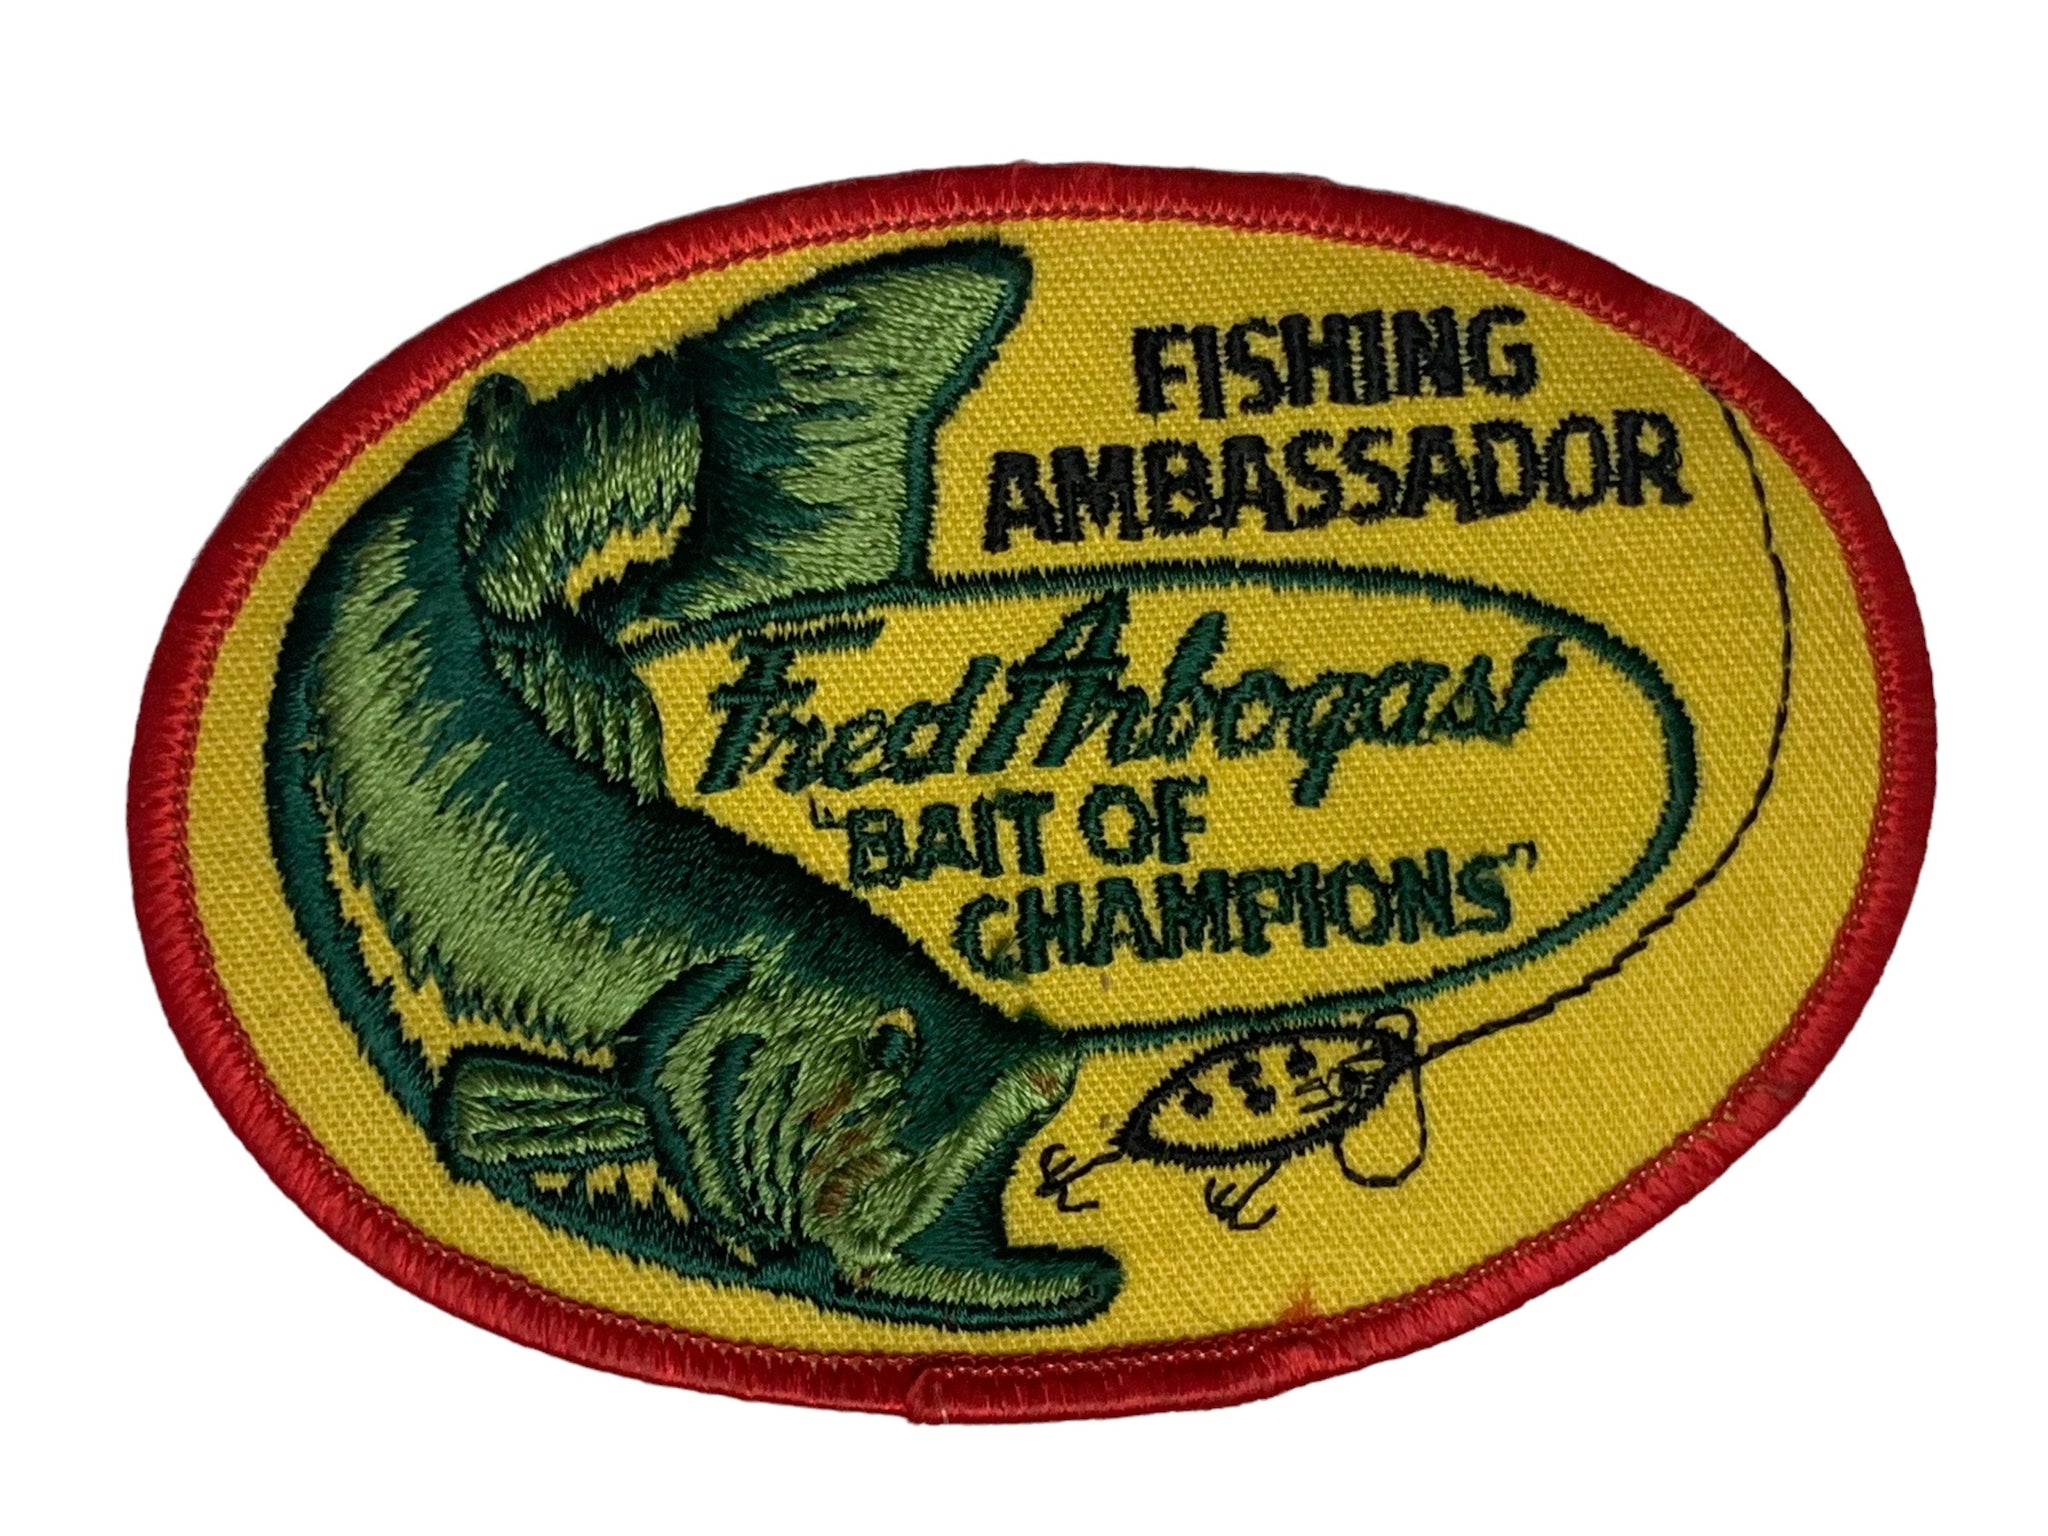 FRED ARBOGAST BASS FISHING AMBASSADOR Vintage Patch in Red – Toad